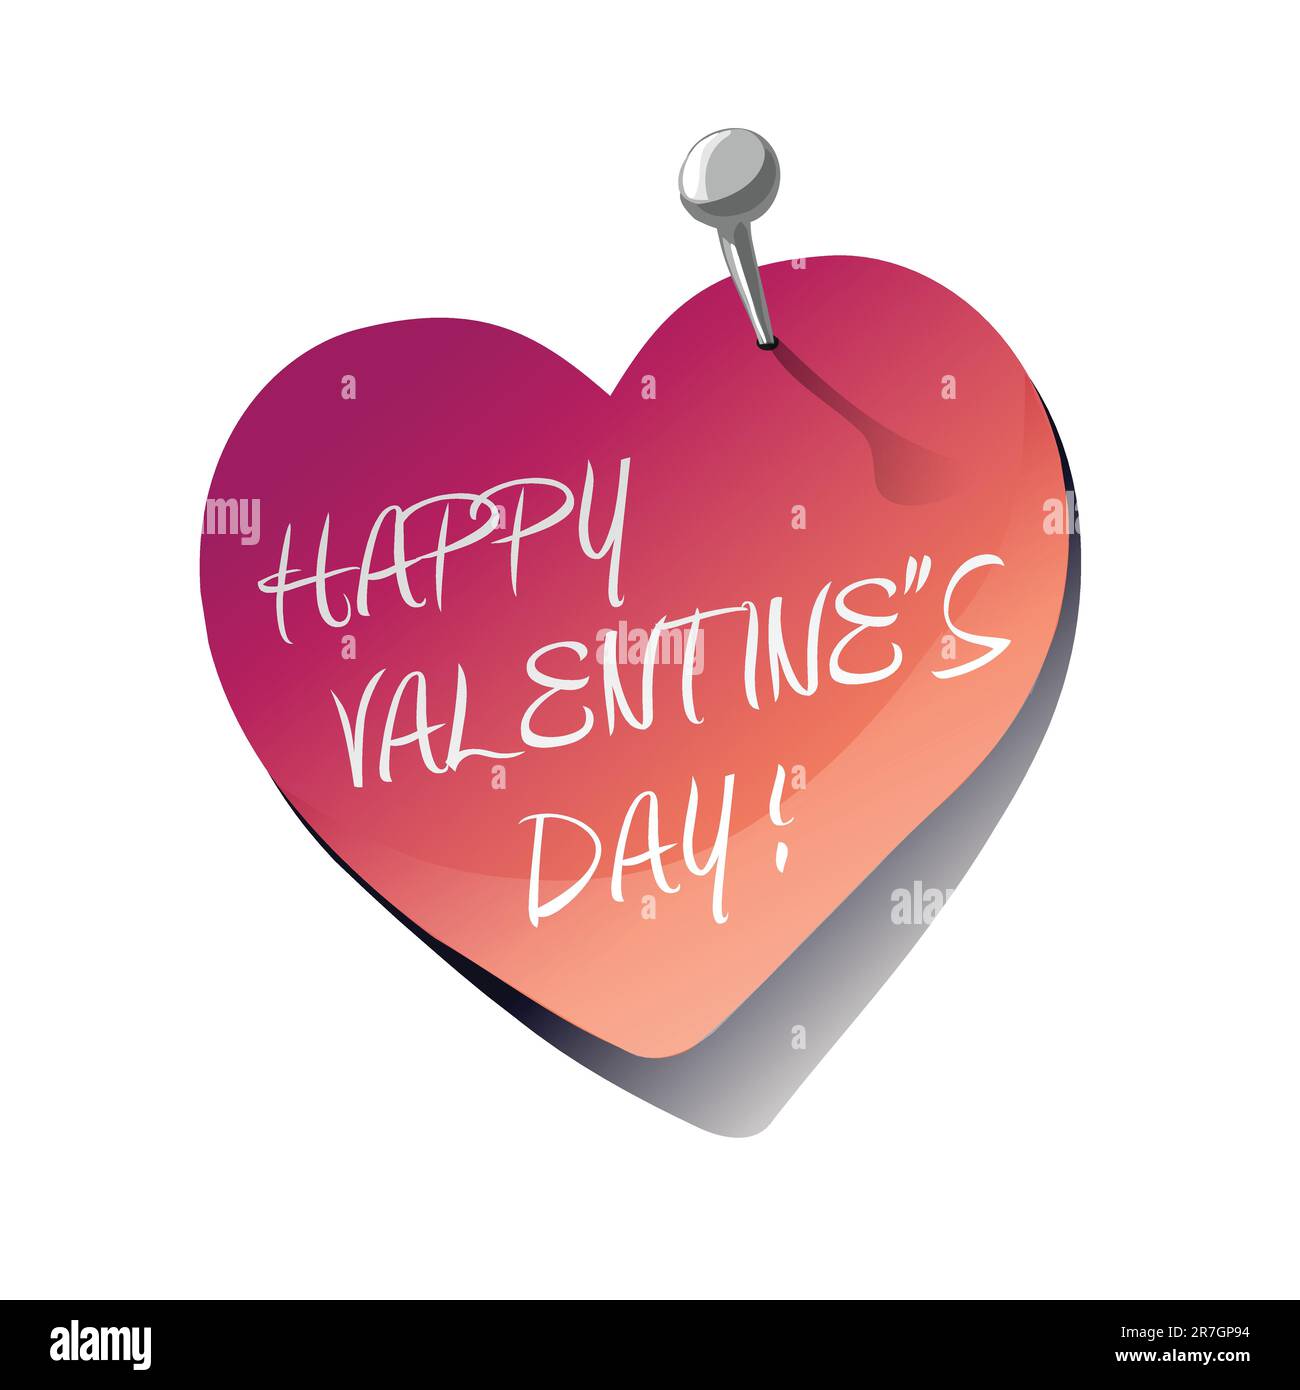 Happy Valentine's Day heart sticky note, vector illustration Stock Vector